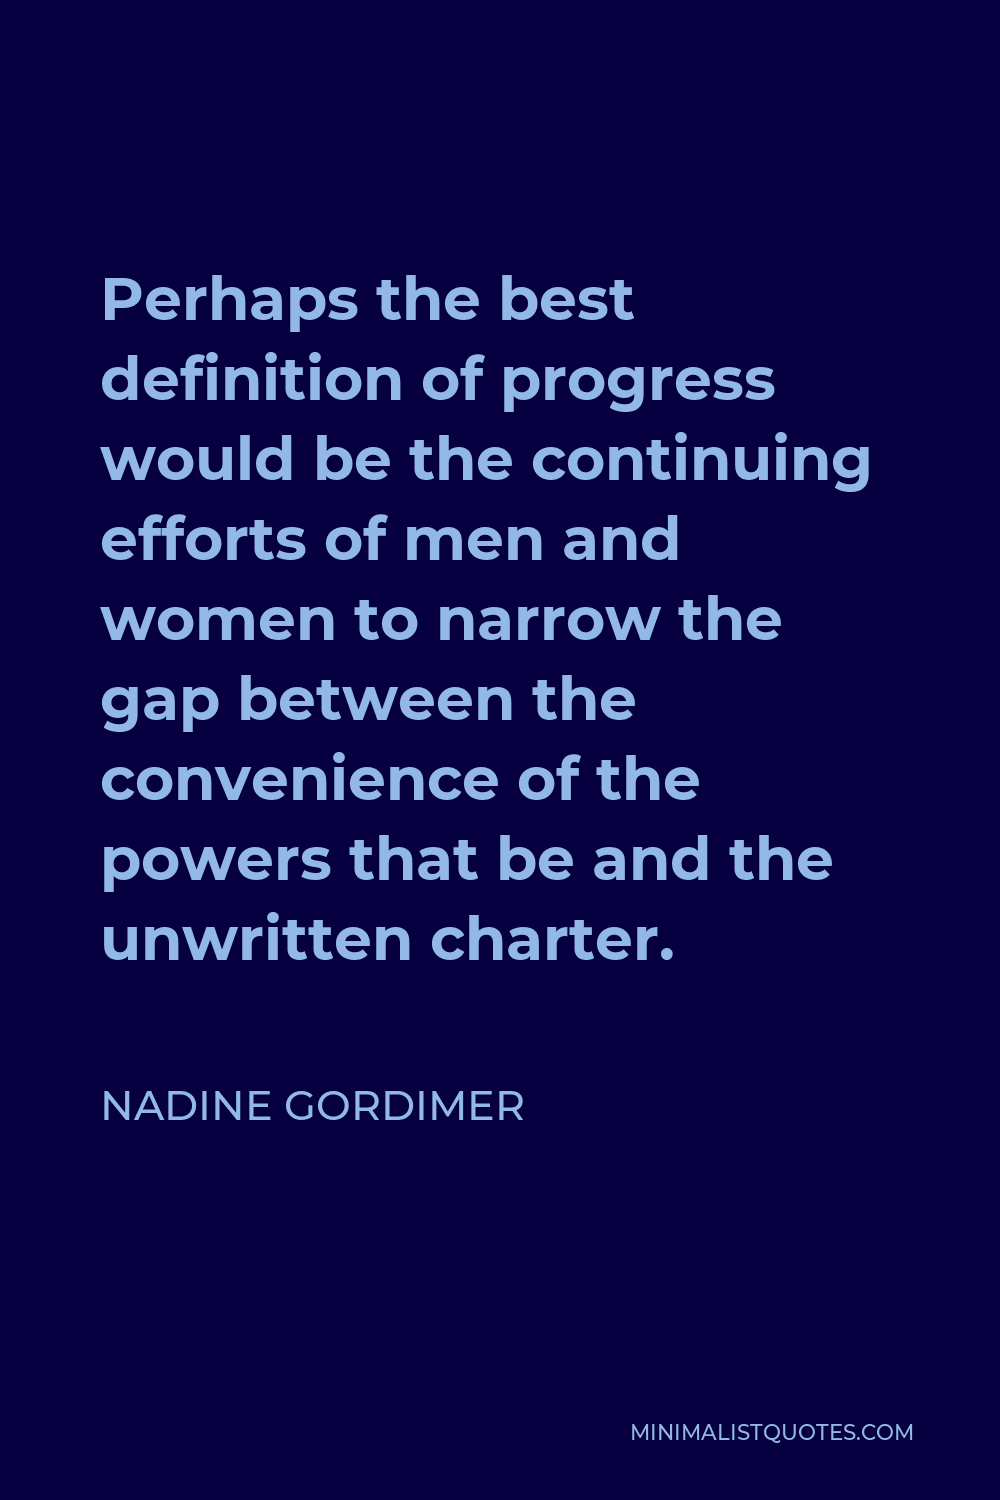 Nadine Gordimer Quote - Perhaps the best definition of progress would be the continuing efforts of men and women to narrow the gap between the convenience of the powers that be and the unwritten charter.